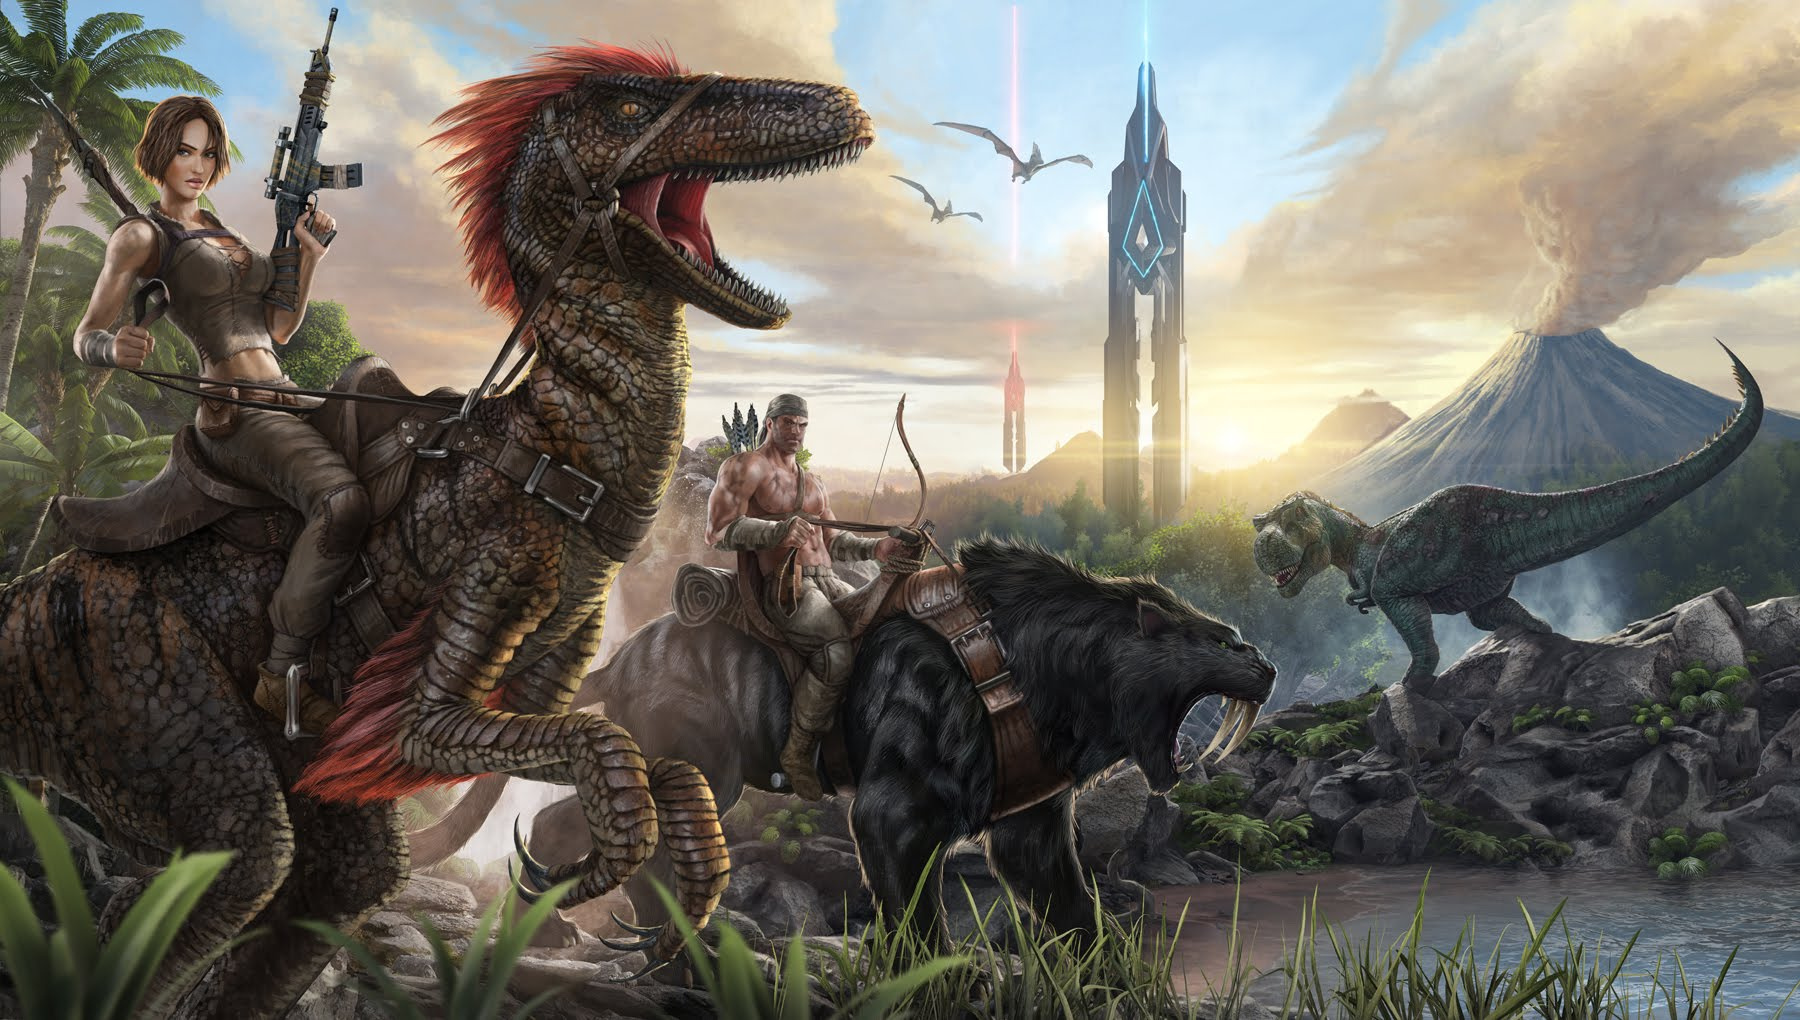 Want Dino Title Ark: Survival Evolved to Bite PS4? Ask Sony - Push Square